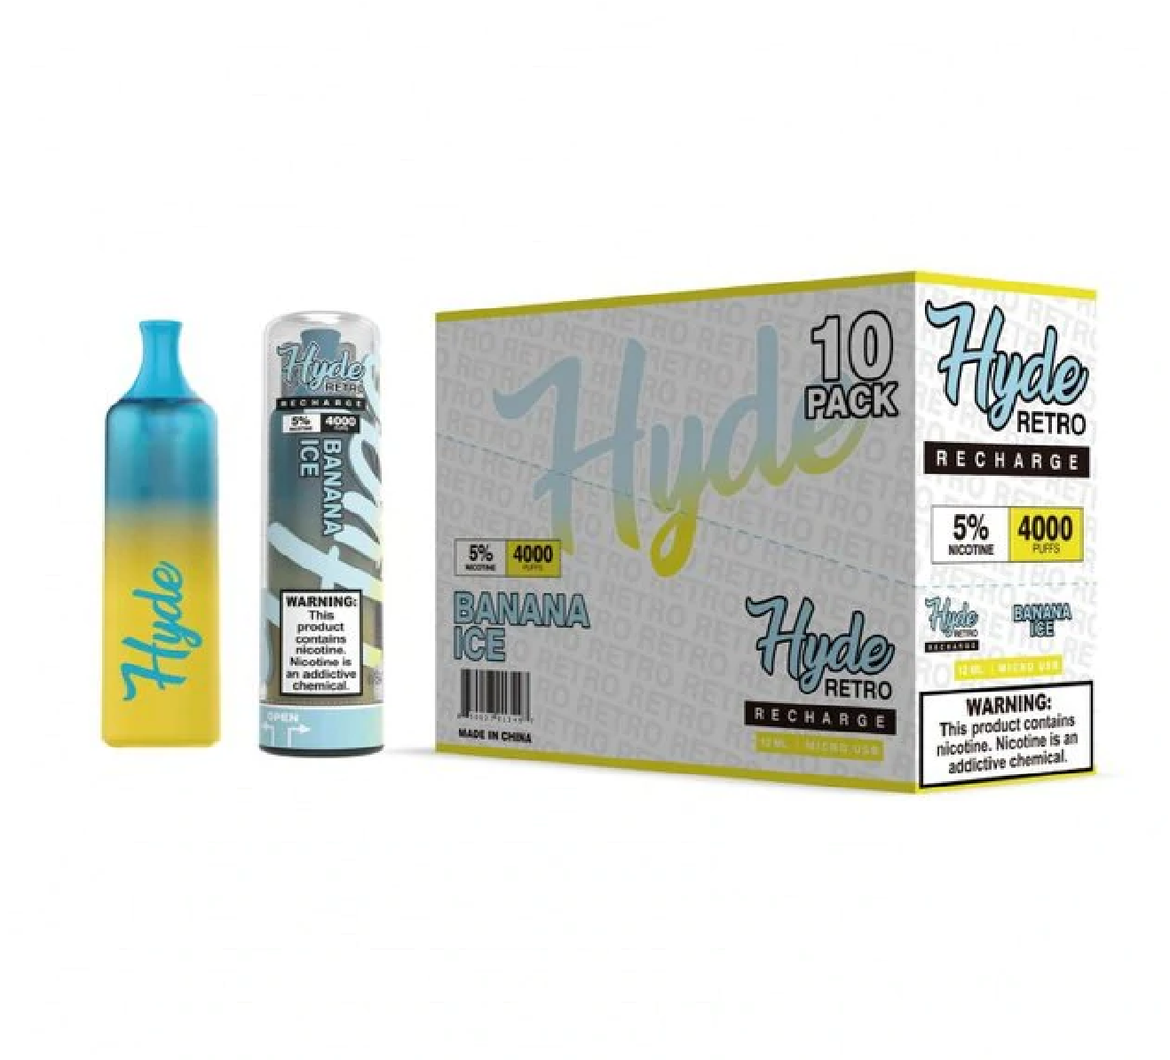 Hyde Retro Recharge 4000 Puffs |PACK OF 10|